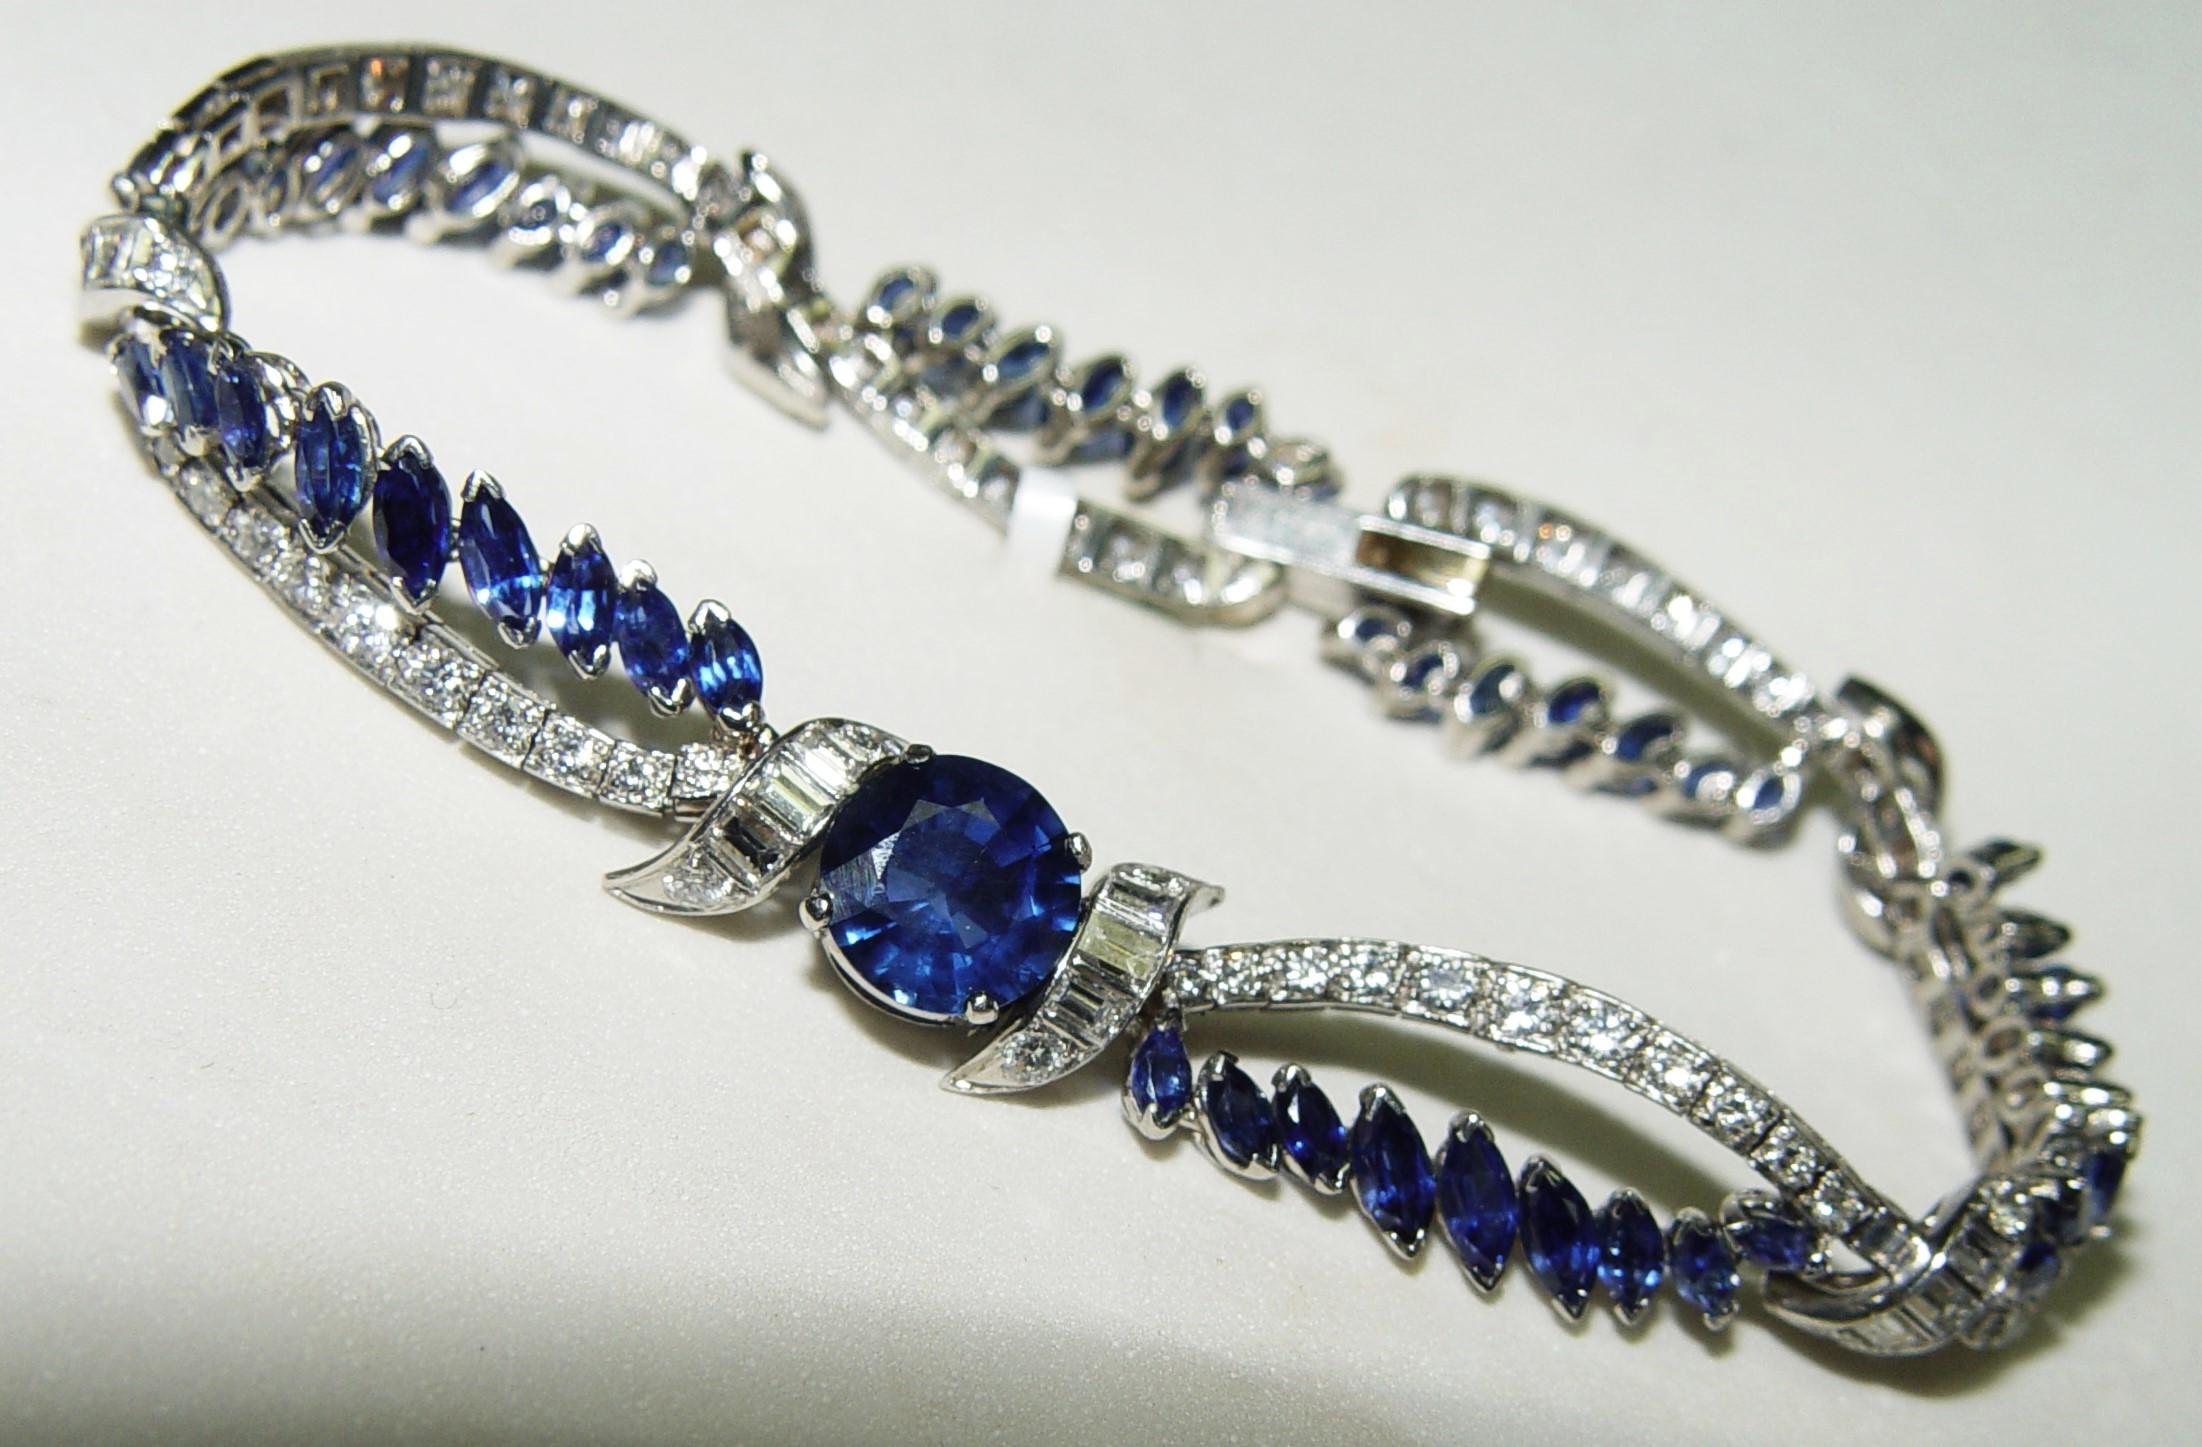 Garland style bracelet by Oscar Heyman & Bros. could be manufactured as early as 1920's. The bracelet is inscribed with 